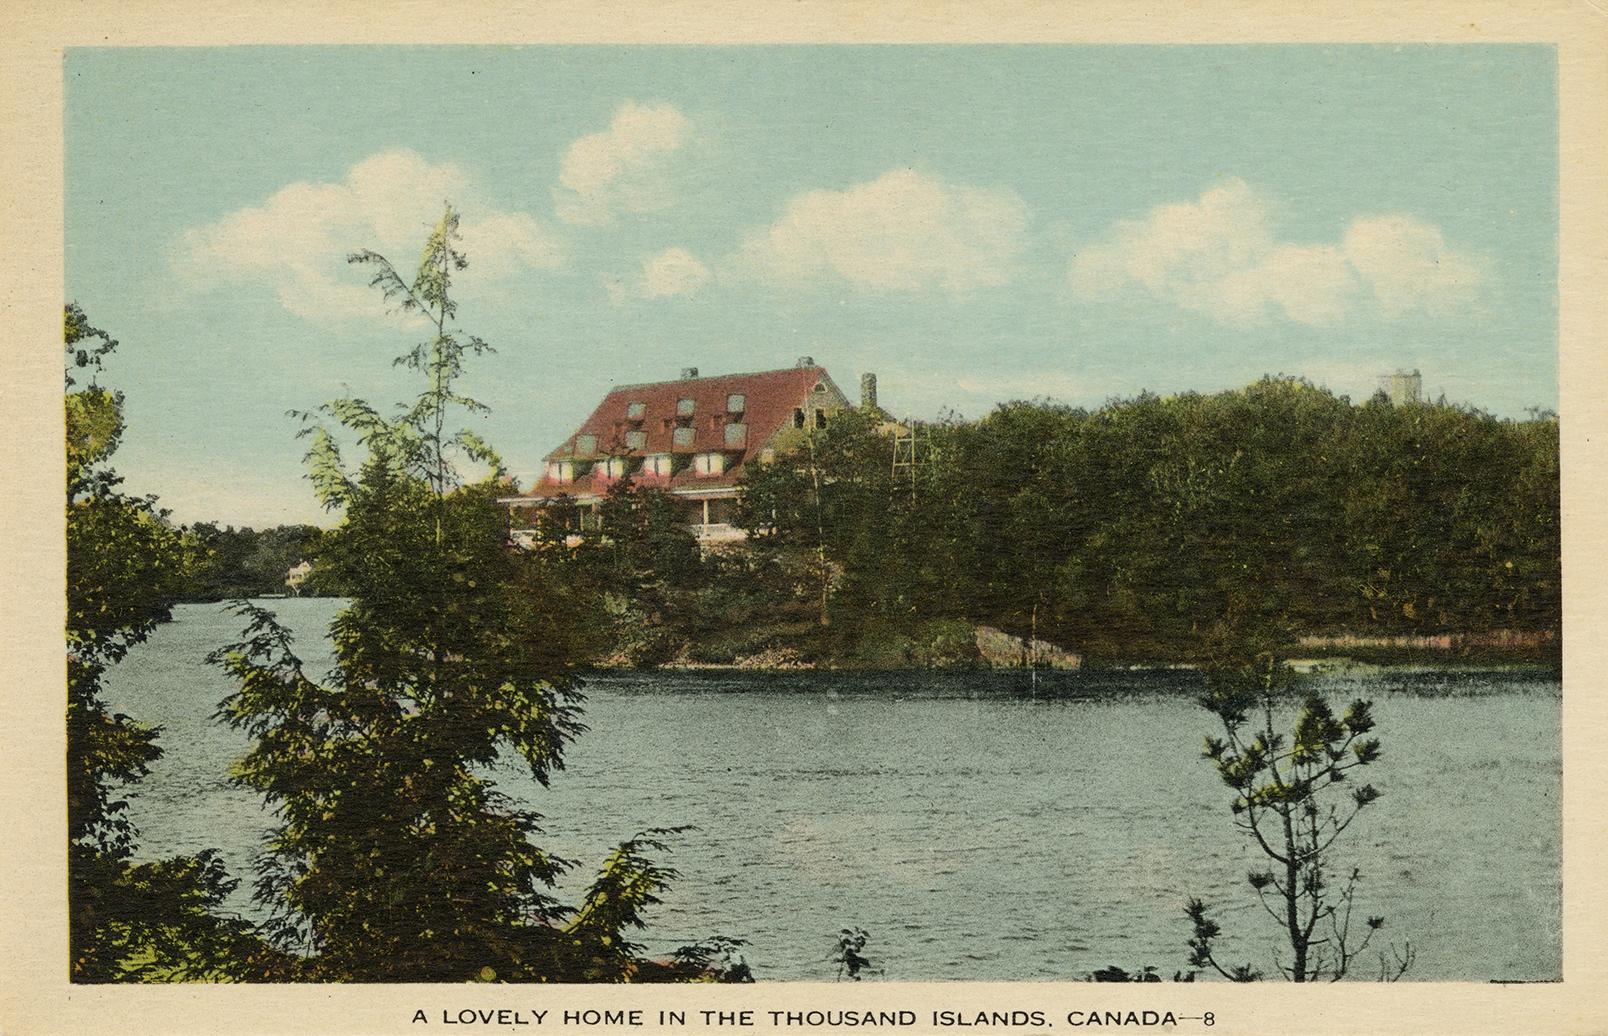 Colorized photograph of a large house on a small island in the middle of a river.